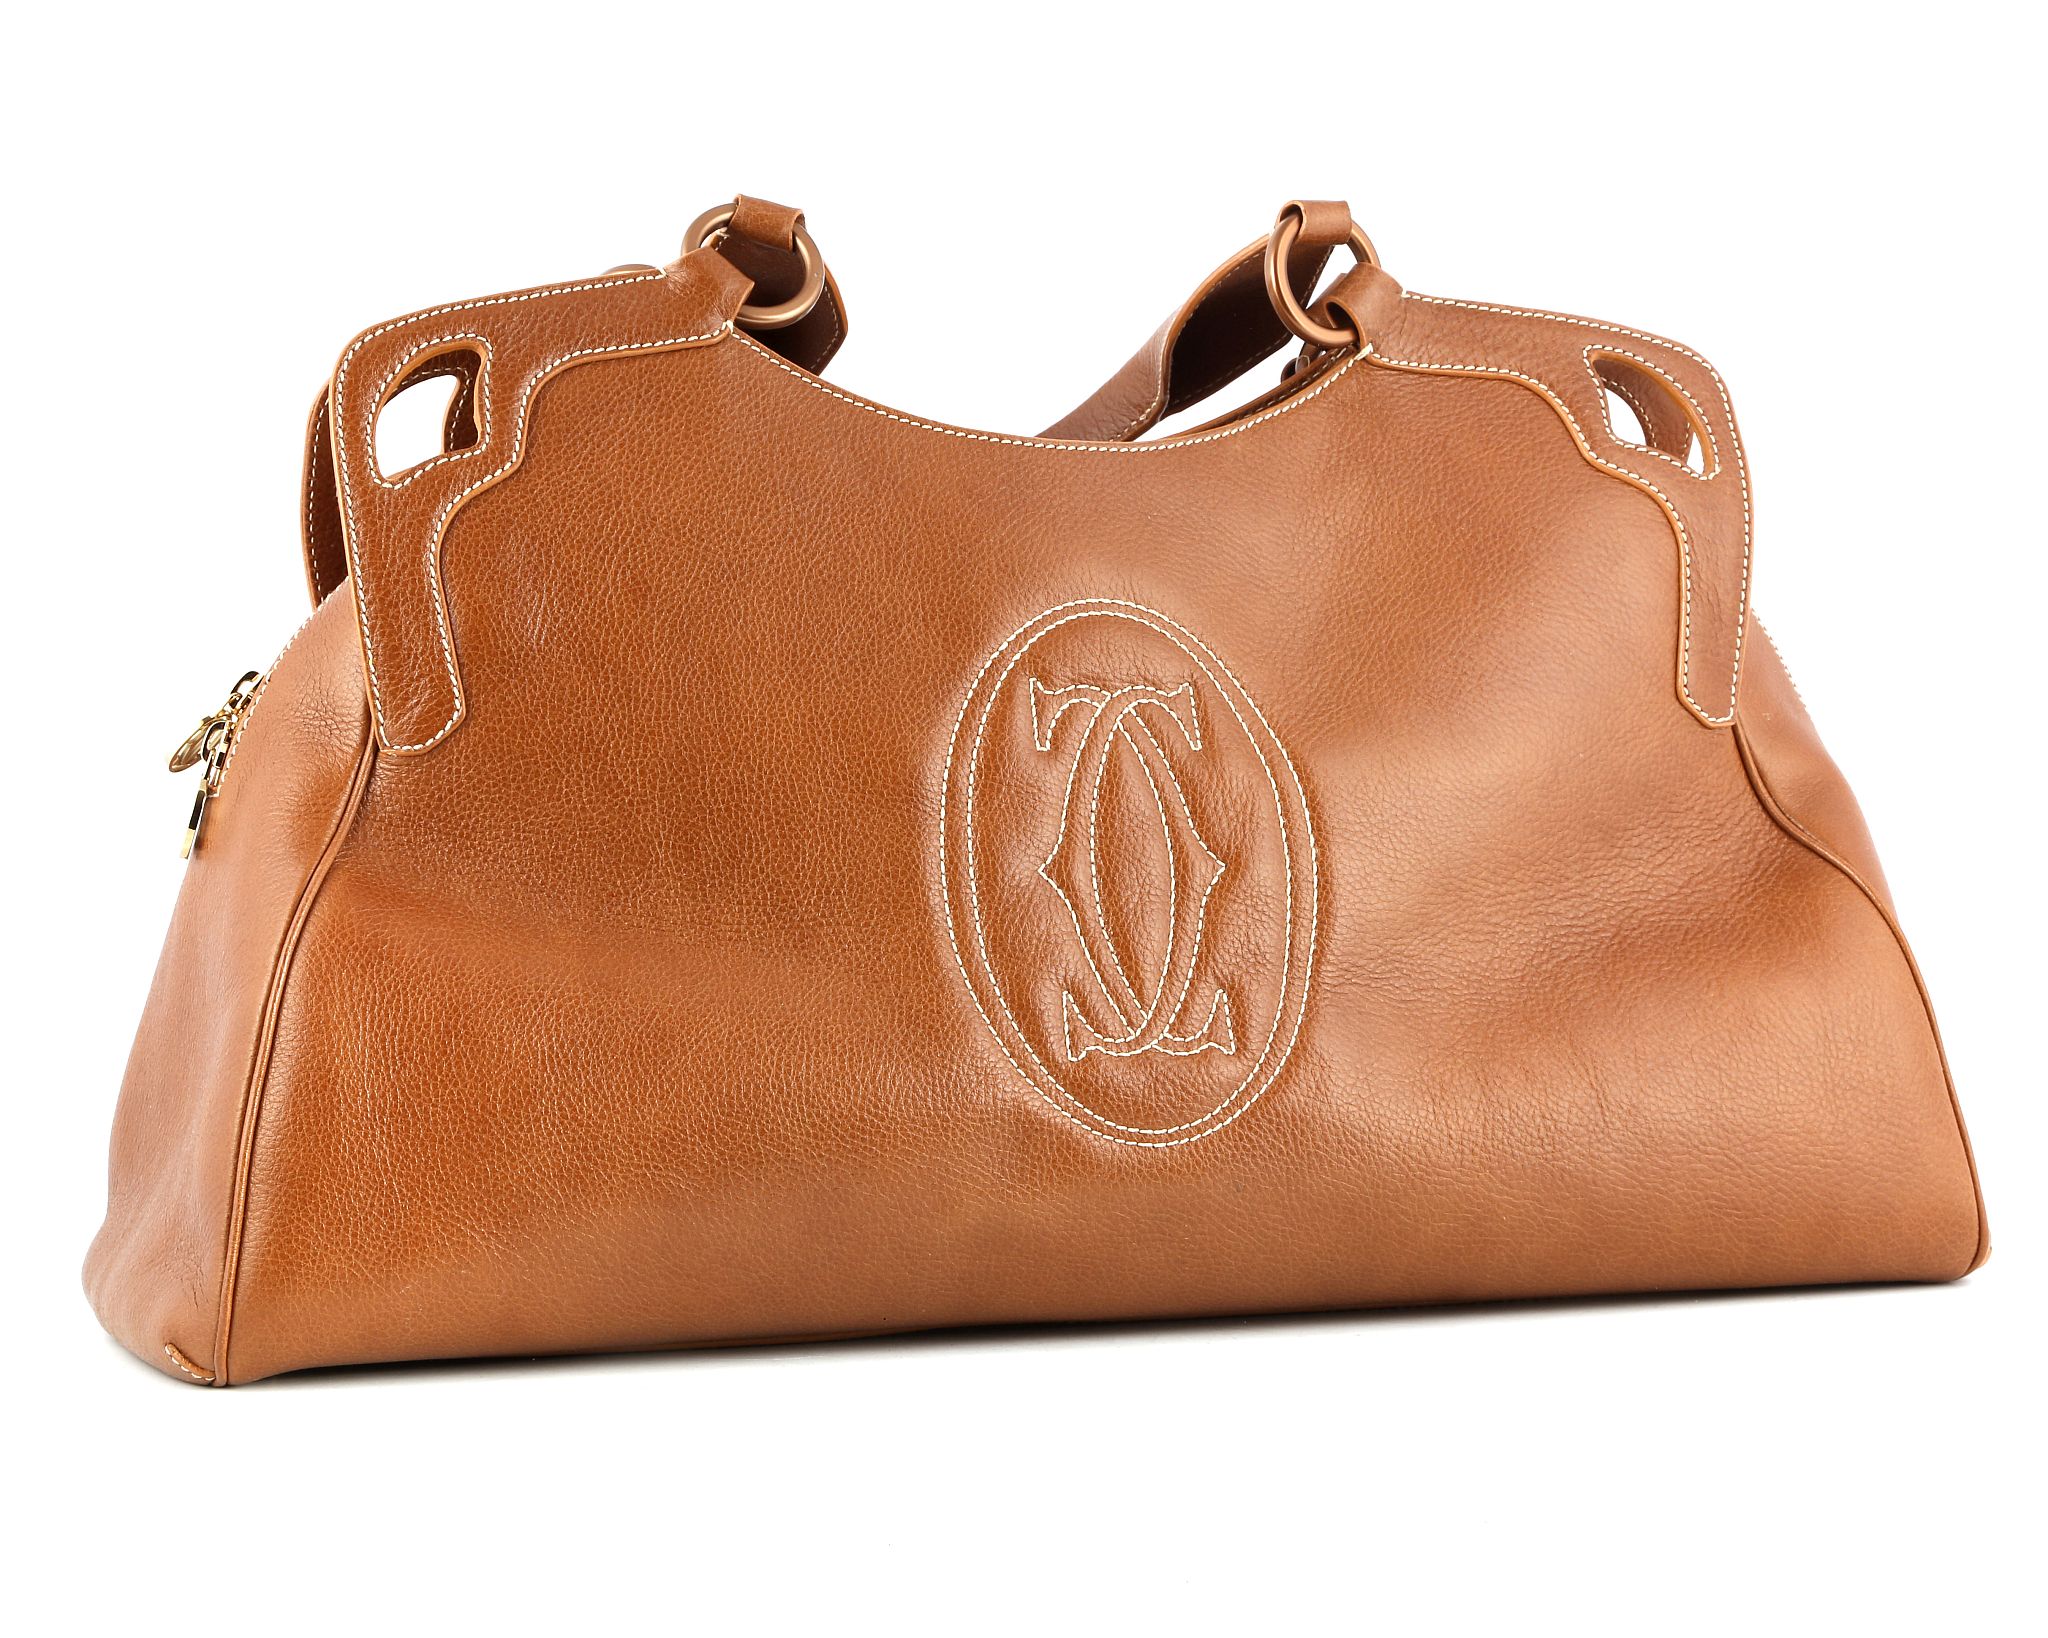 CARTIER MARCELLO DE CARTIER HANDBAG, tan leather with white stitching, 49cm wide, 28cm high, with - Image 2 of 18